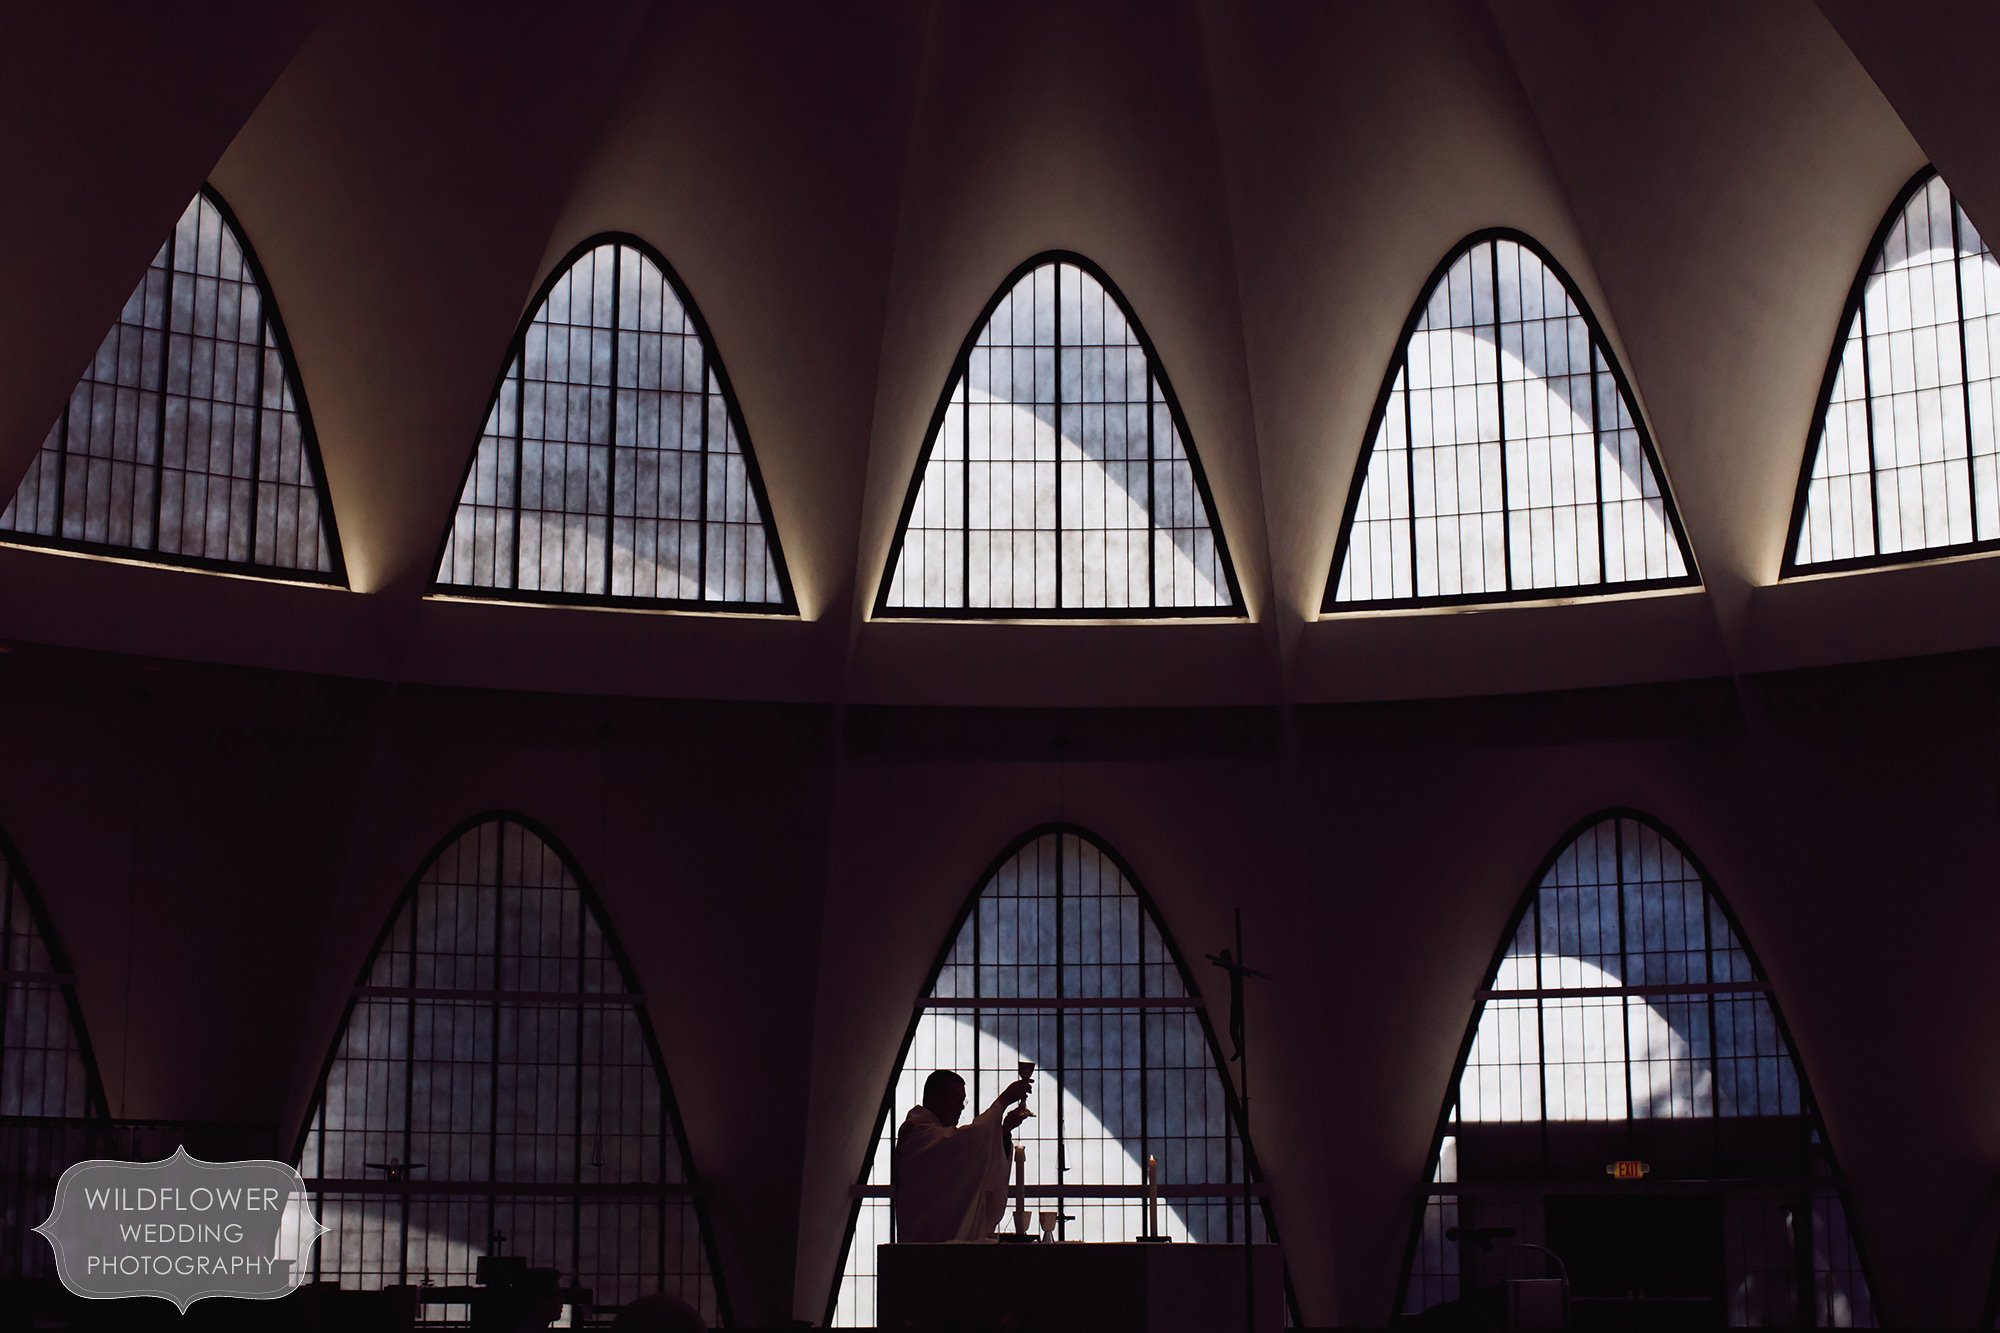 Fine art style wedding photo of priest silhouetted at St. Anslem church in St. Louis, MO.